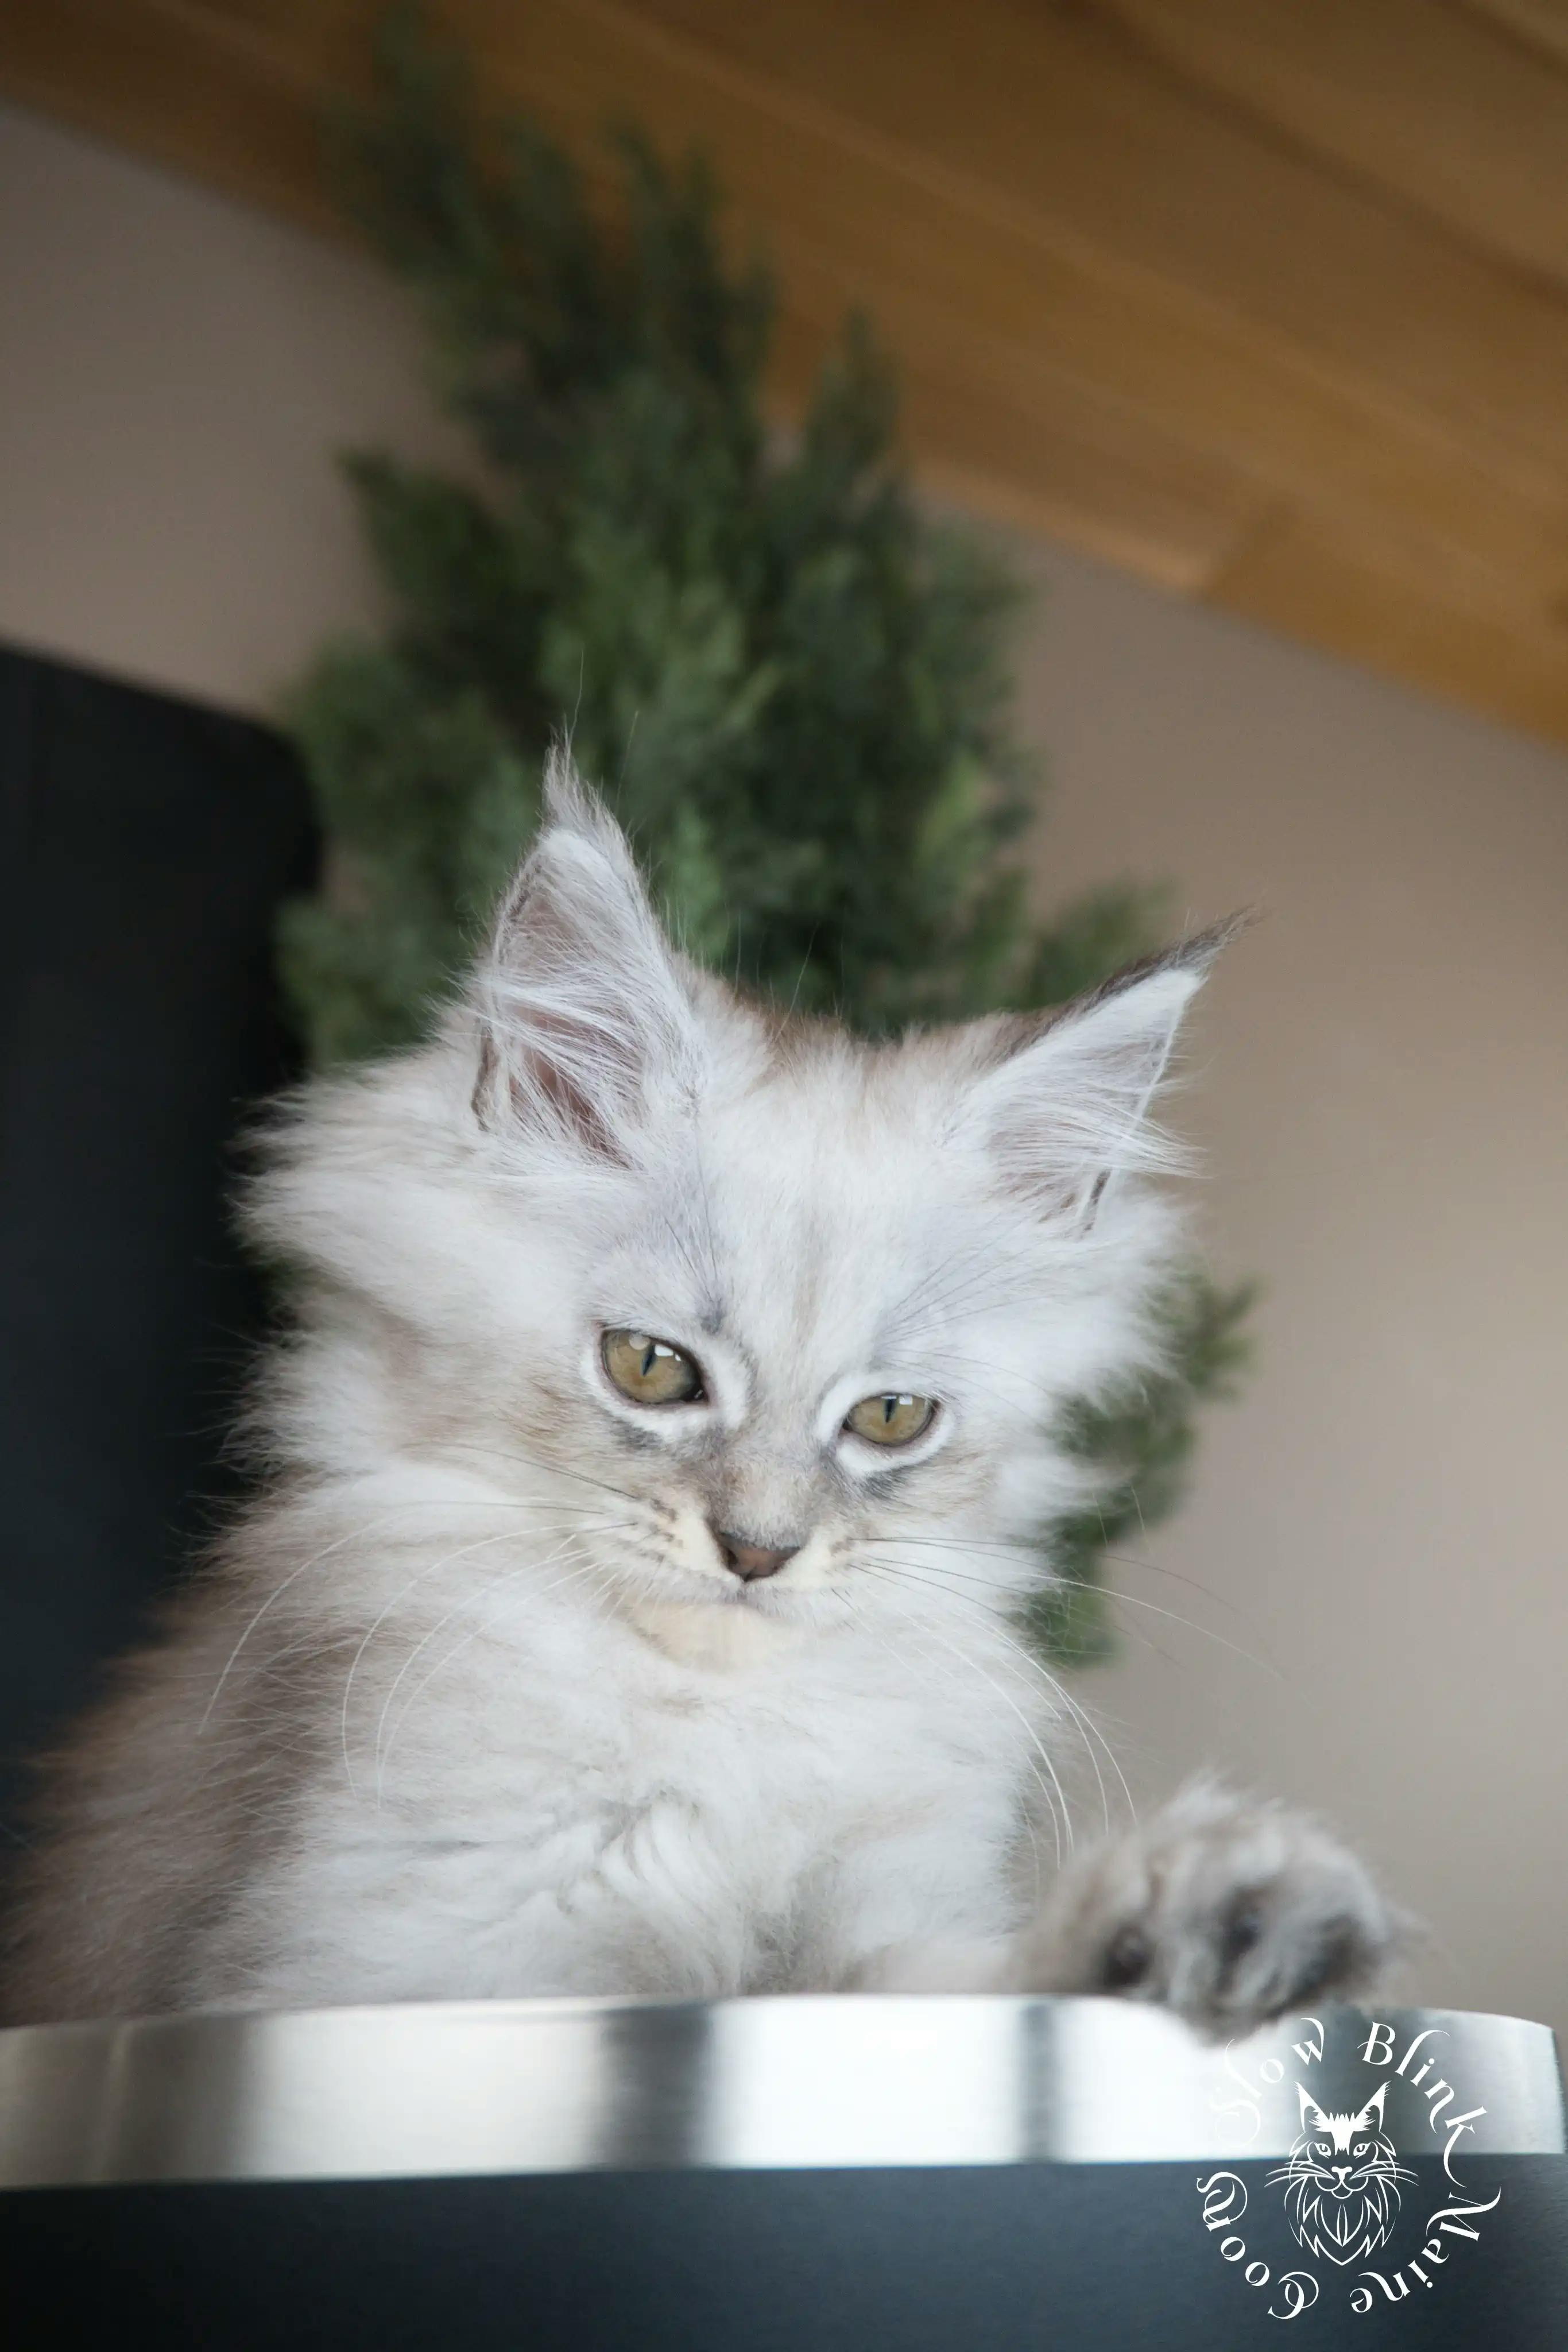 High Silver Maine Coon Kittens > black silver tabby maine coon kitten | ems code ns 22 23 24 25 | slowblinkmainecoons | 604